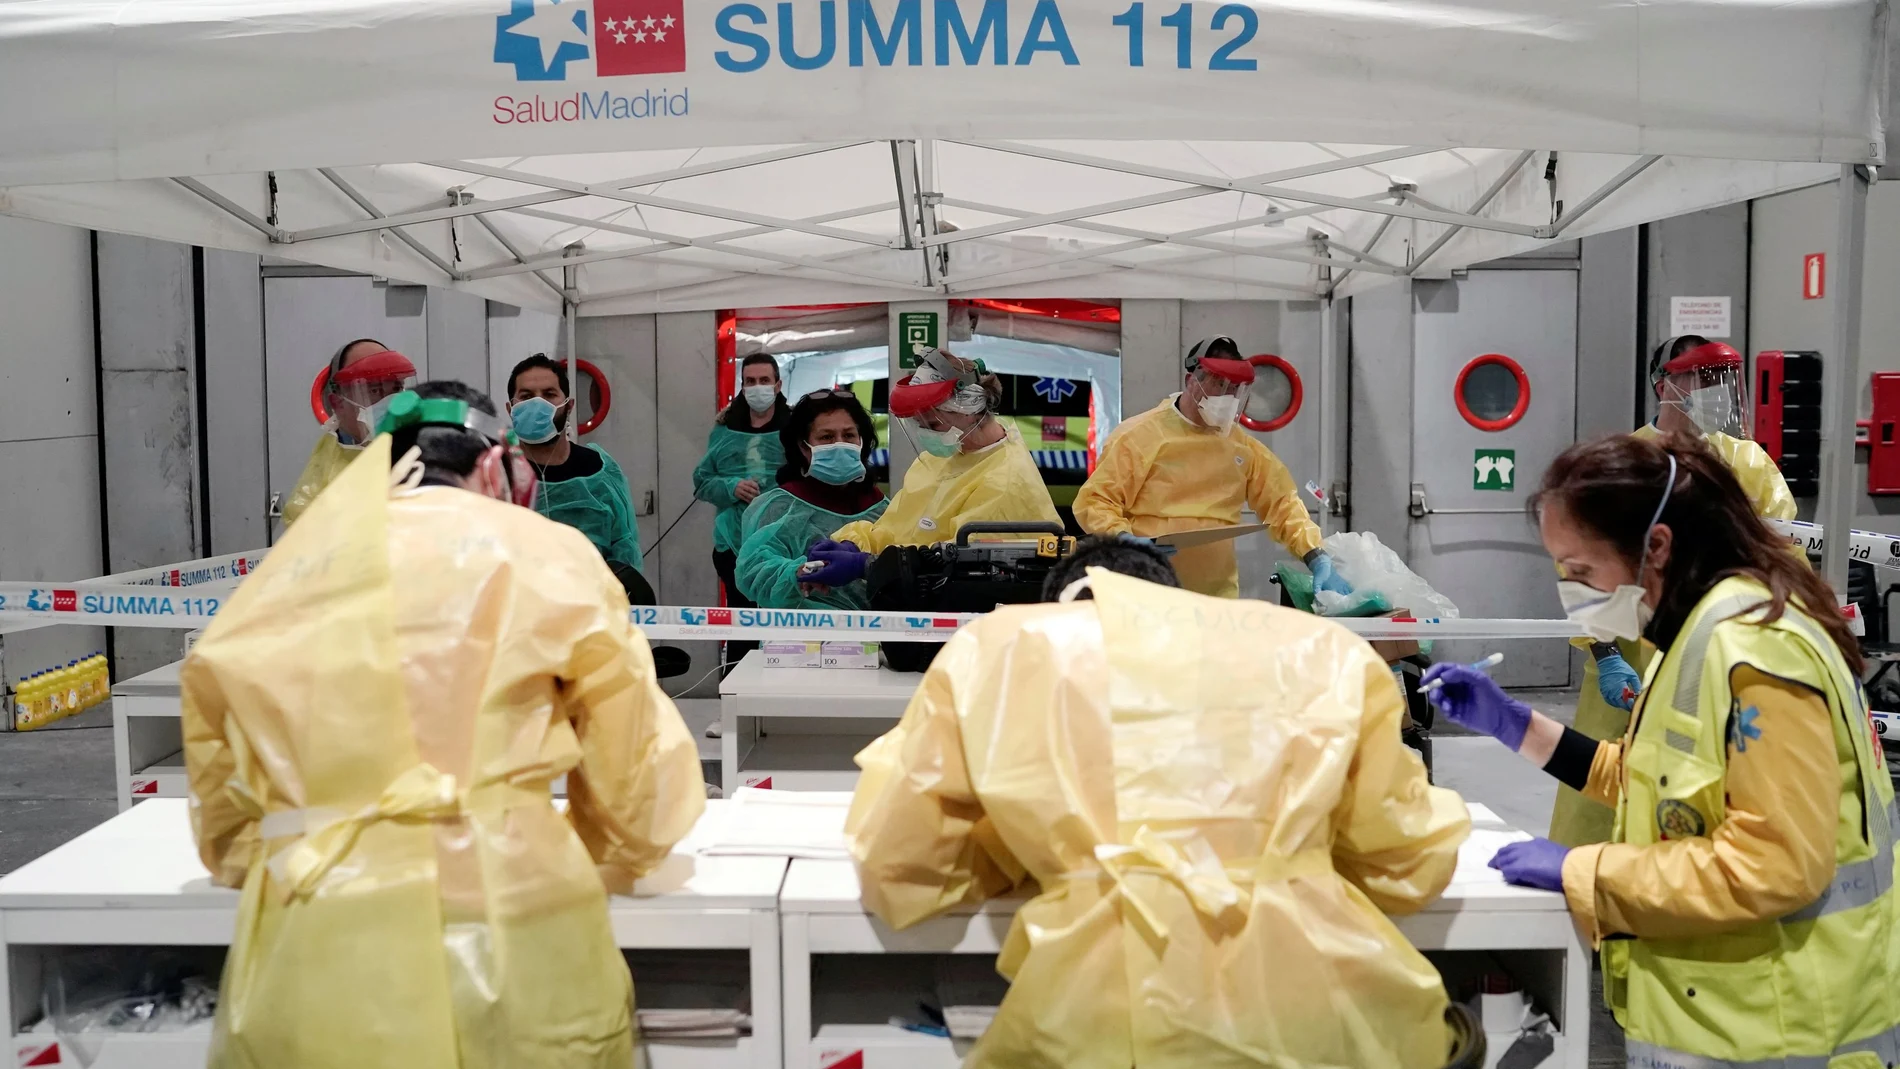 Coronavirus patients arrive at a military hospital set up at the IFEMA conference centre in Madrid